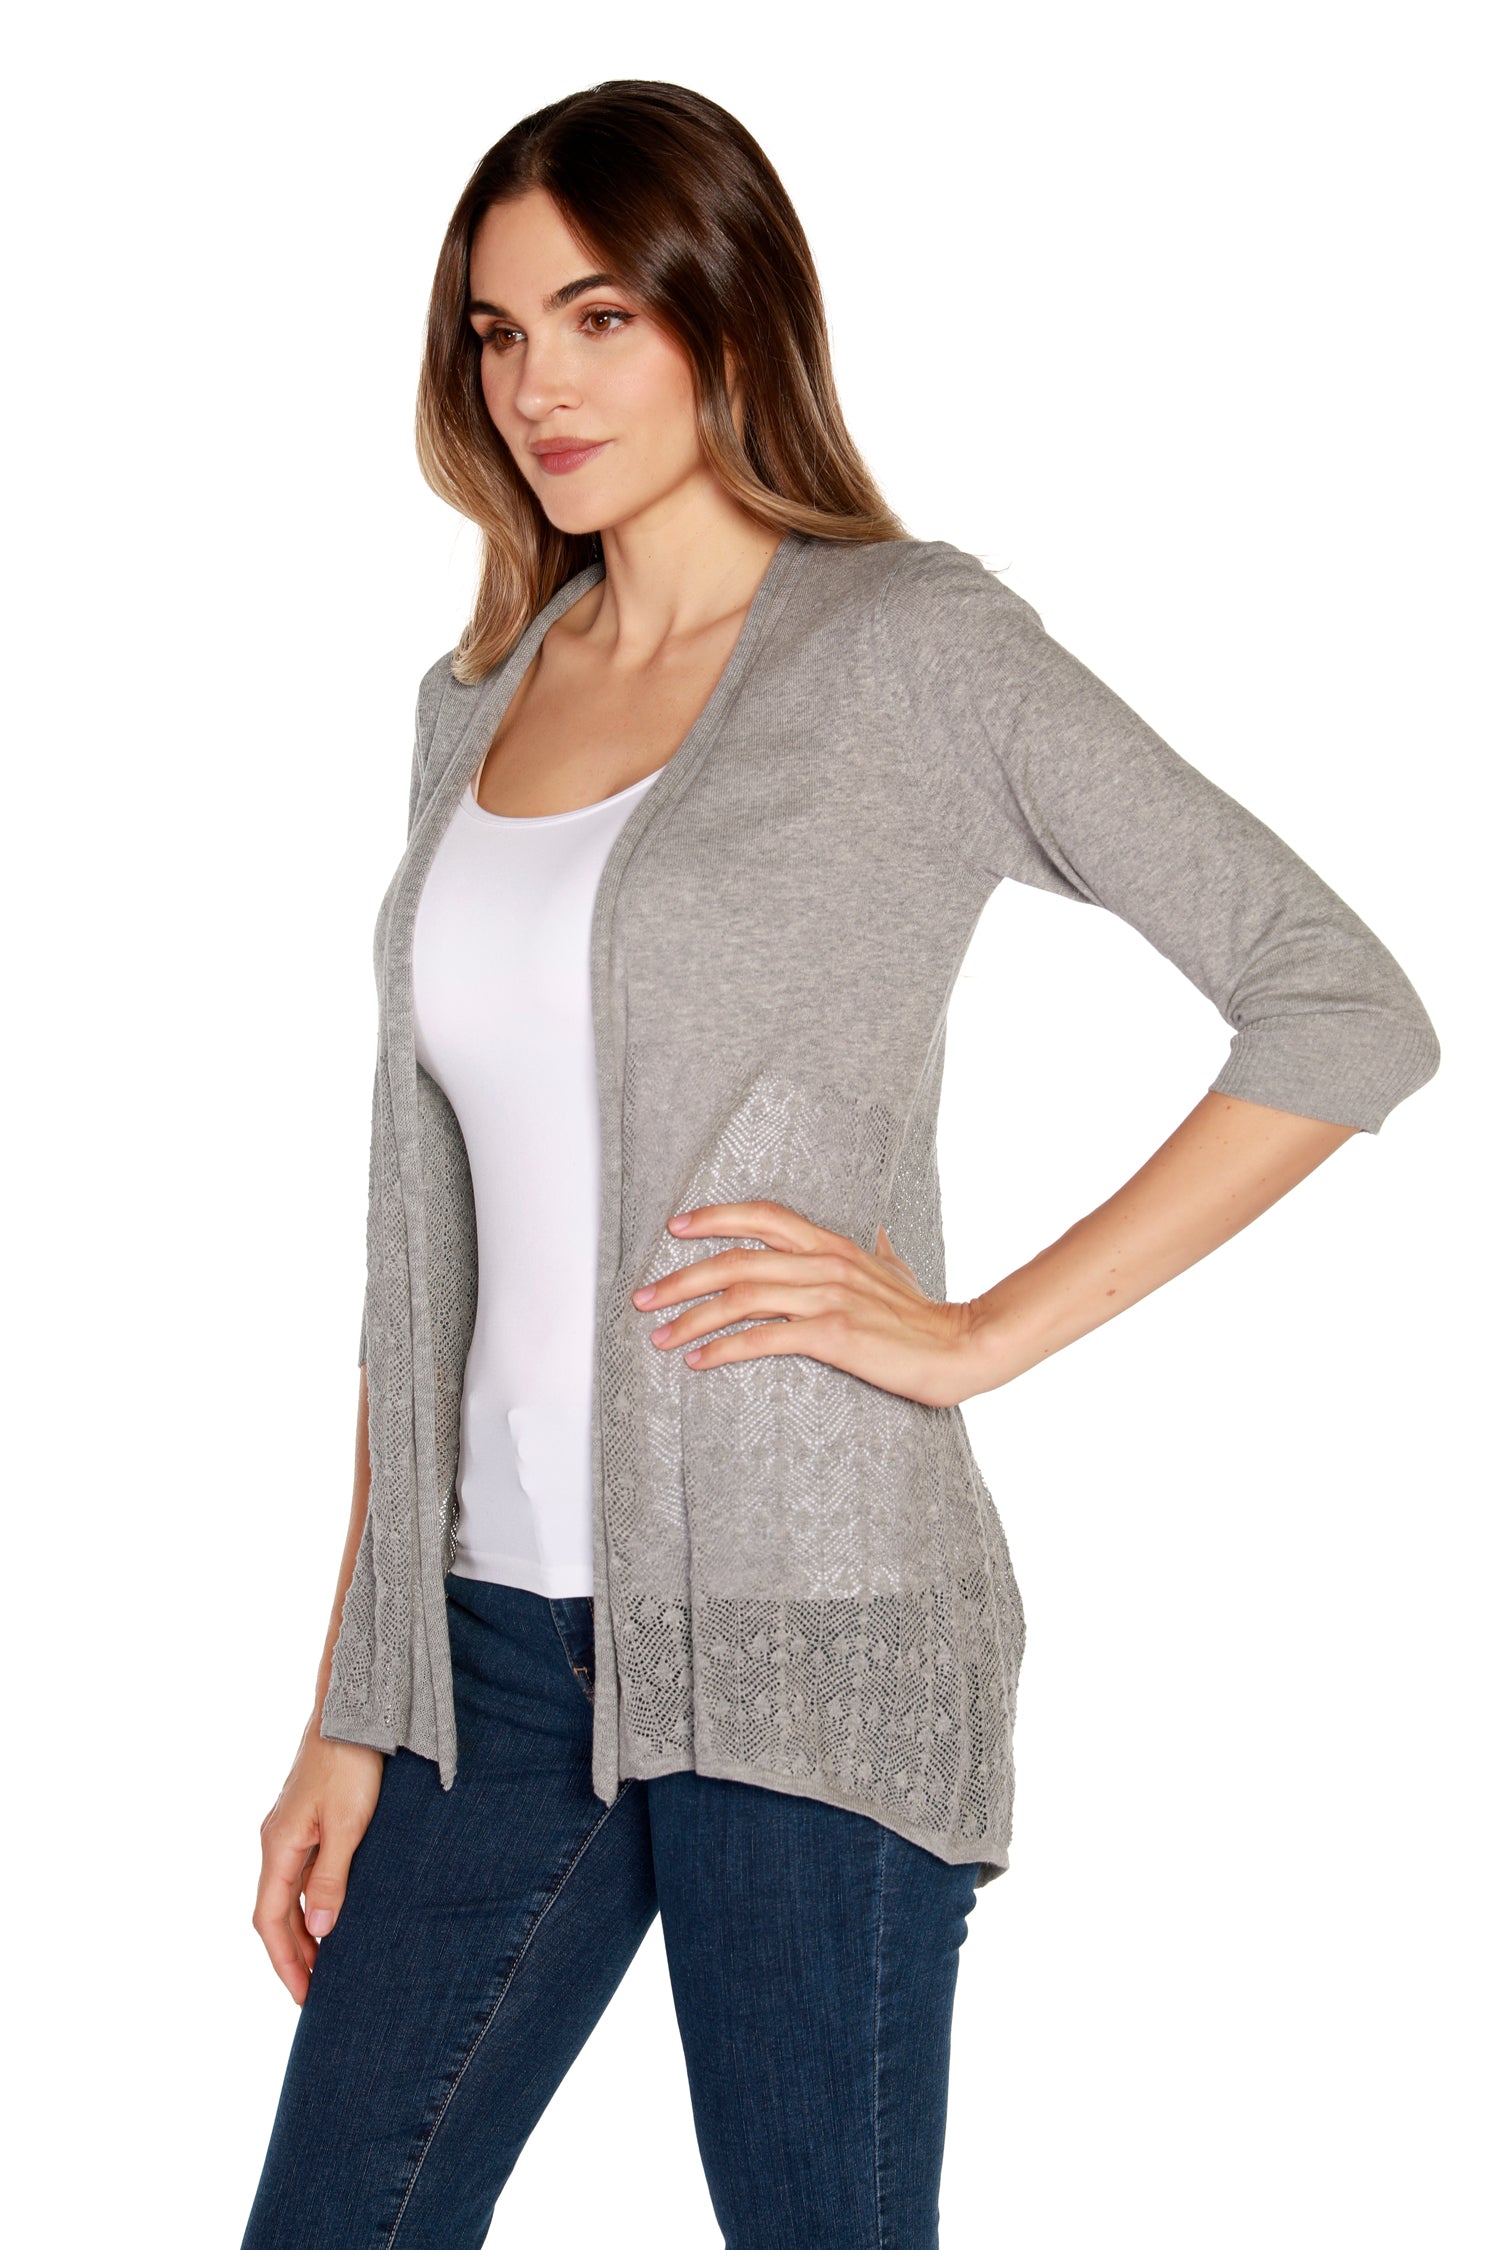 Women's Hi Low Cardigan Sweater in a Lightweight Knit with a Semi-Sheer Pointelle Stitch